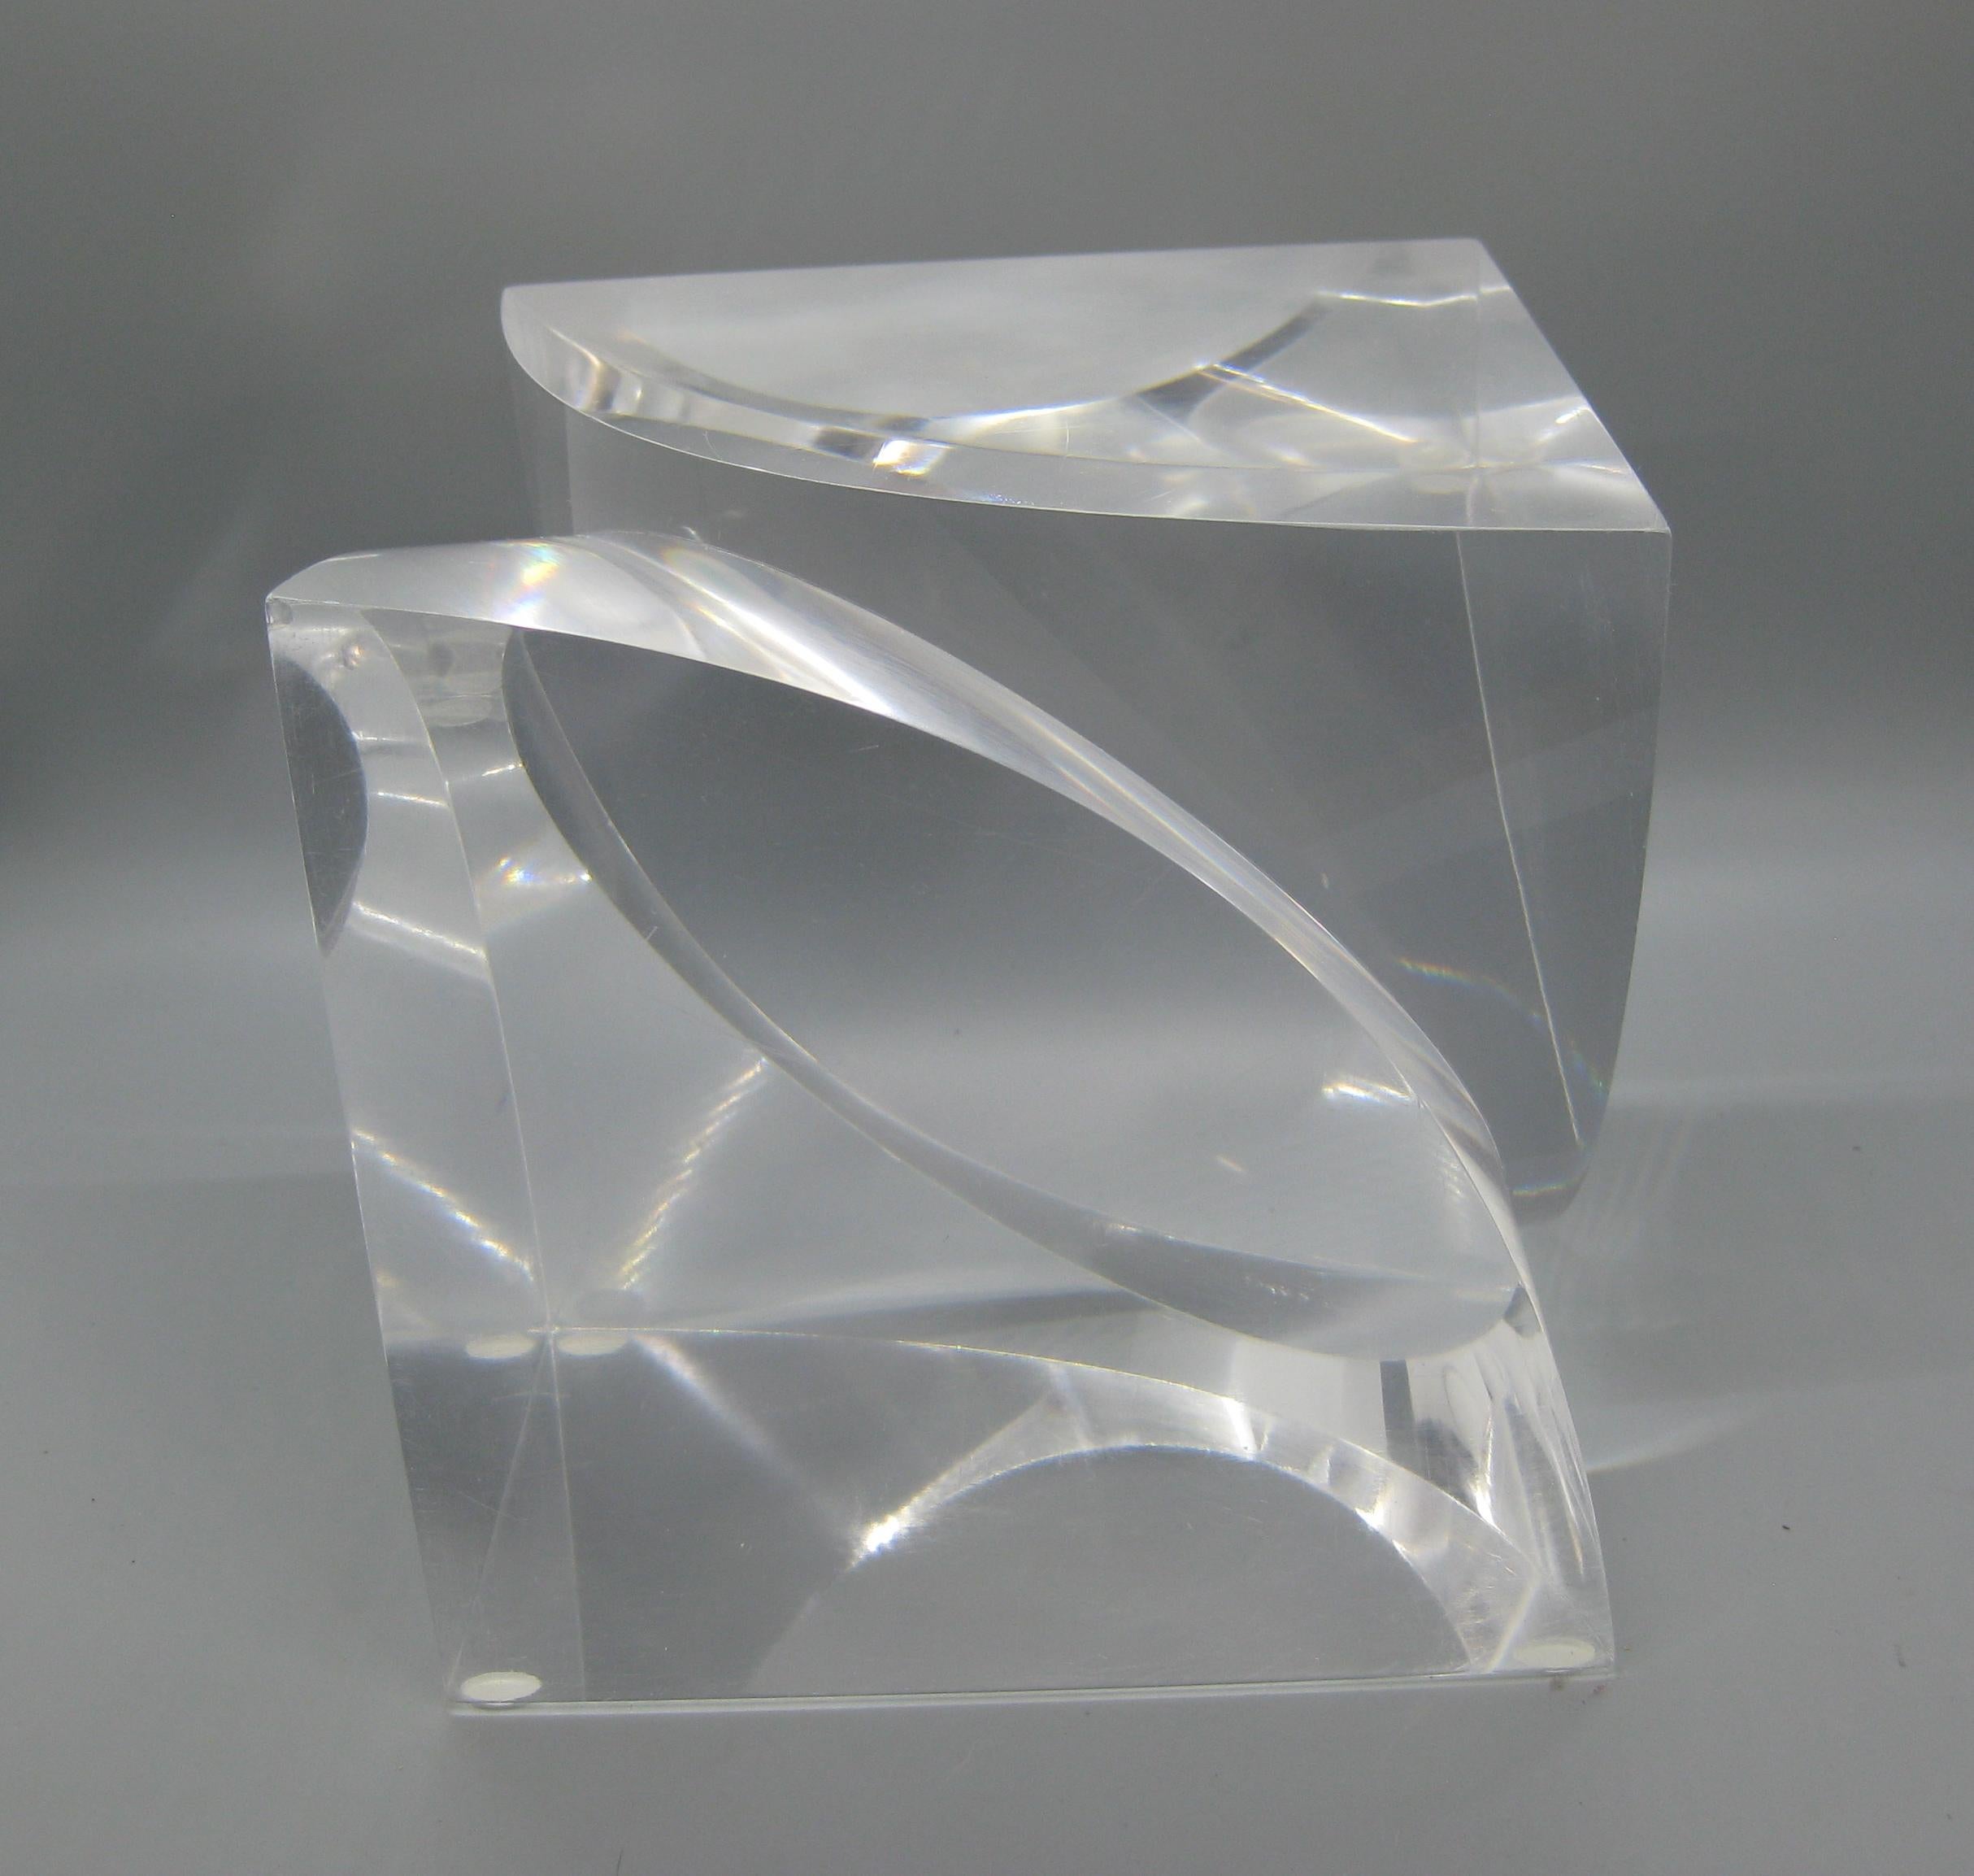 1960's-1970's Lucite Acrylic Optical Op-Art Large Cube Abstract Sculpture For Sale 5